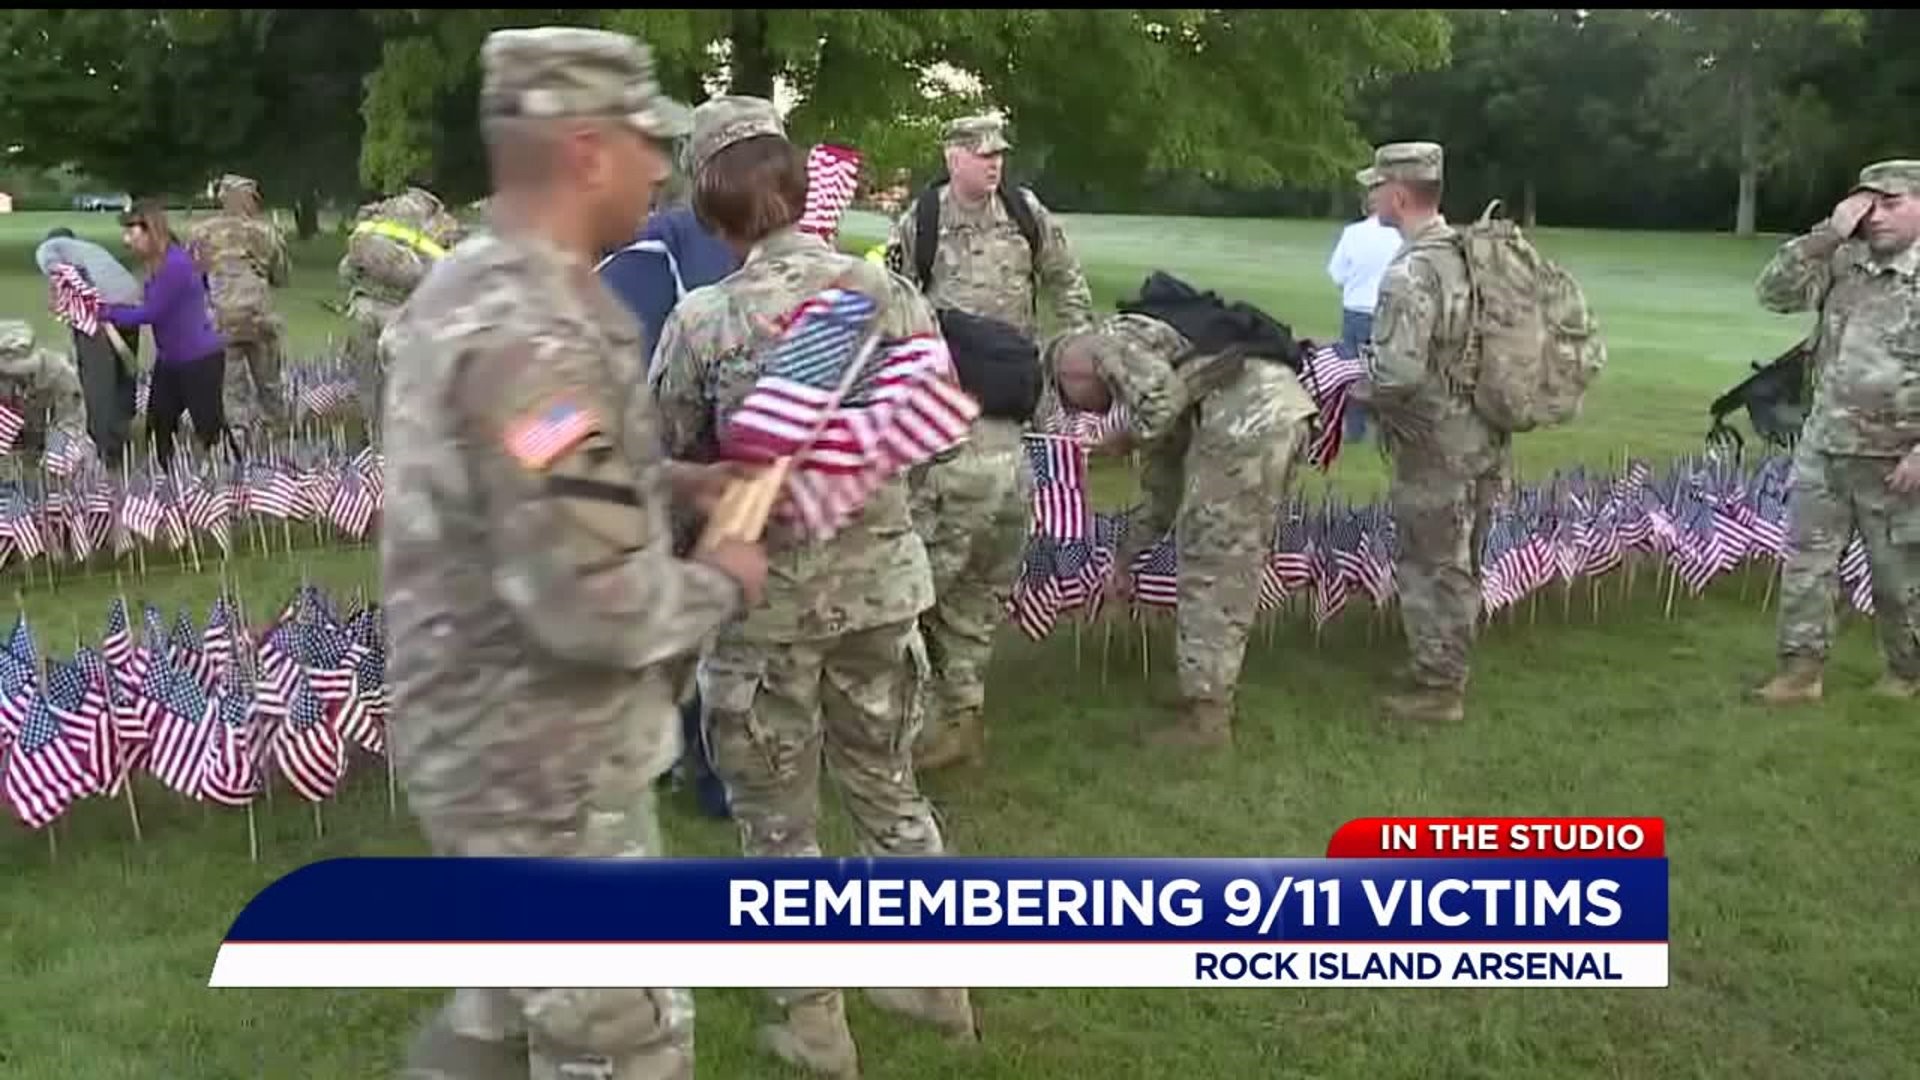 Arsenal soldiers to reflect, remember the lives lost on 9-11